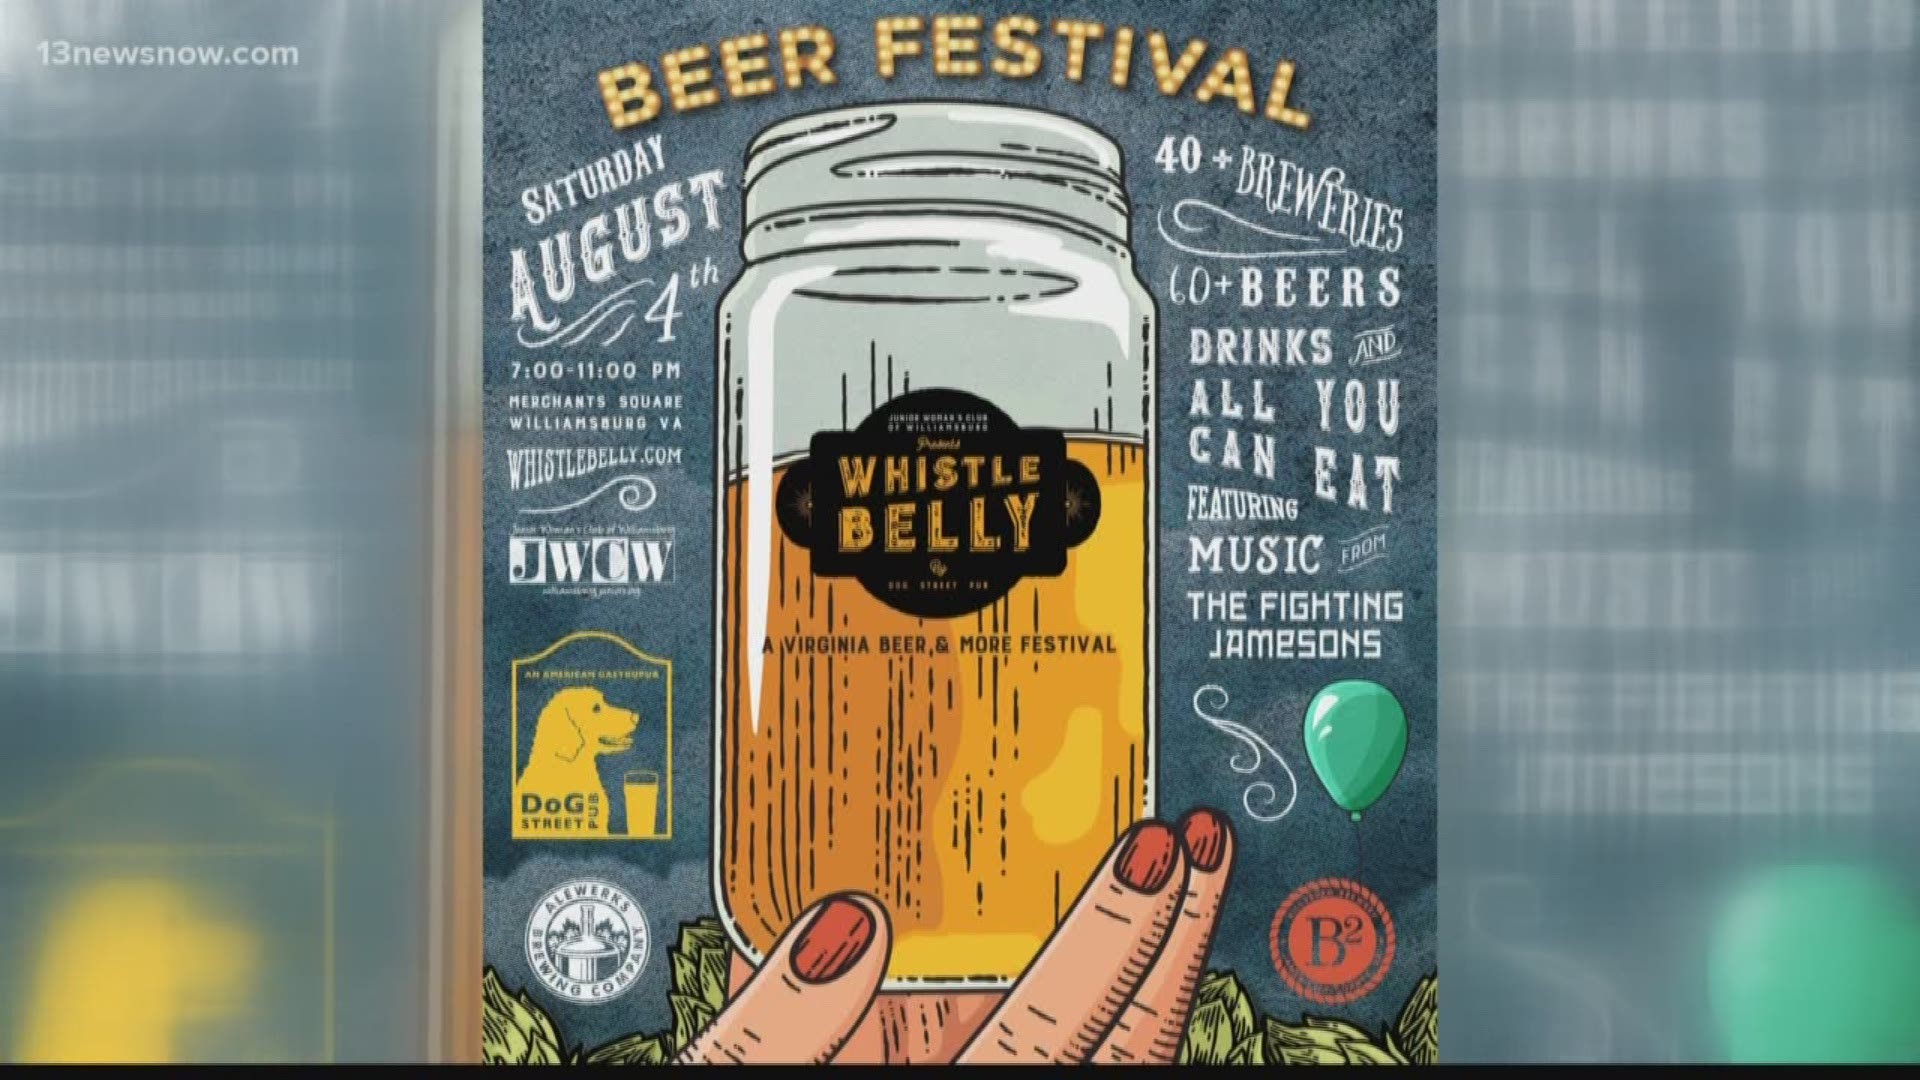 The 4th Annual Whistle Belly: Virginia Beer and More Festival is returning to Williamsburg on Saturday, August 4 from 7 p.m. to 11 p.m.